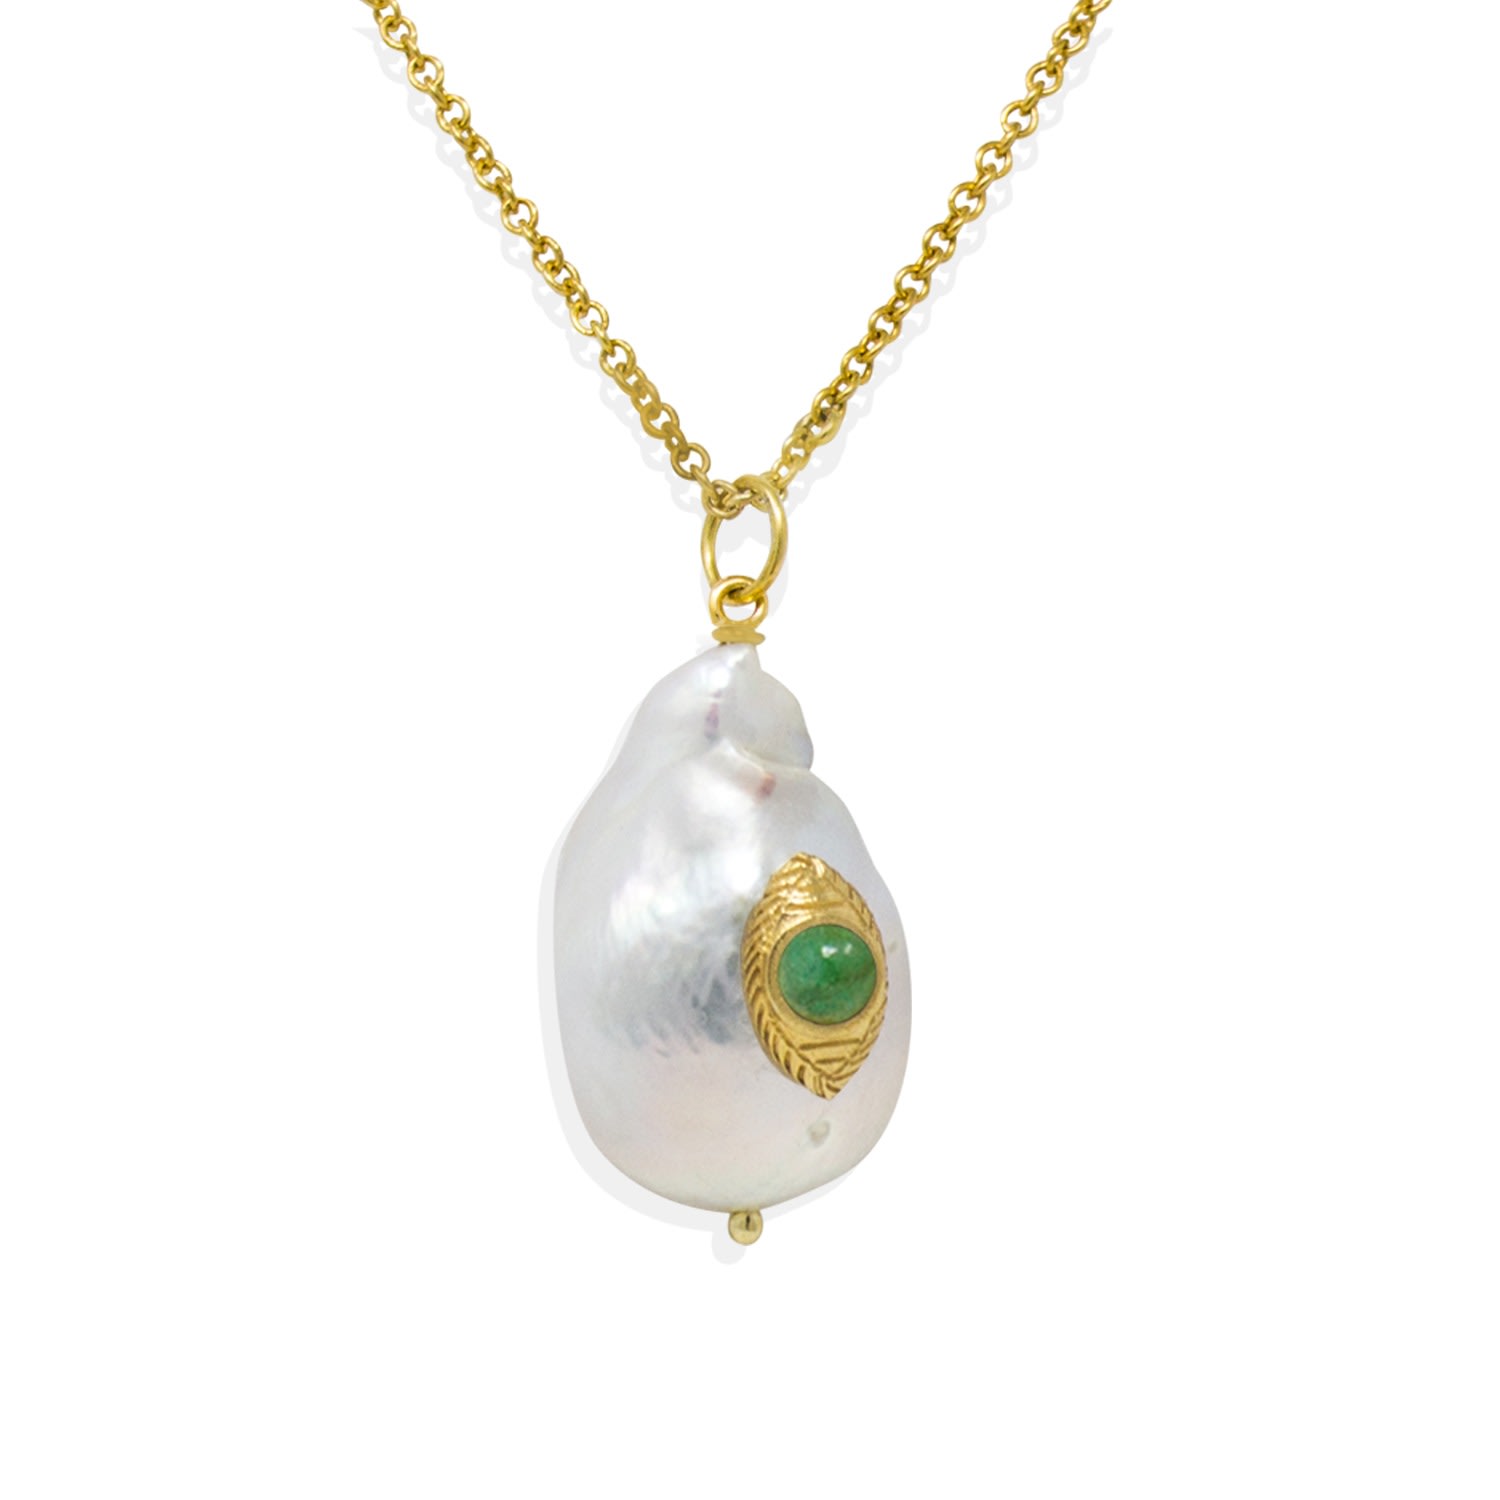 Women’s Gold The Eye Green Emerald Pendant Necklace Vintouch Italy